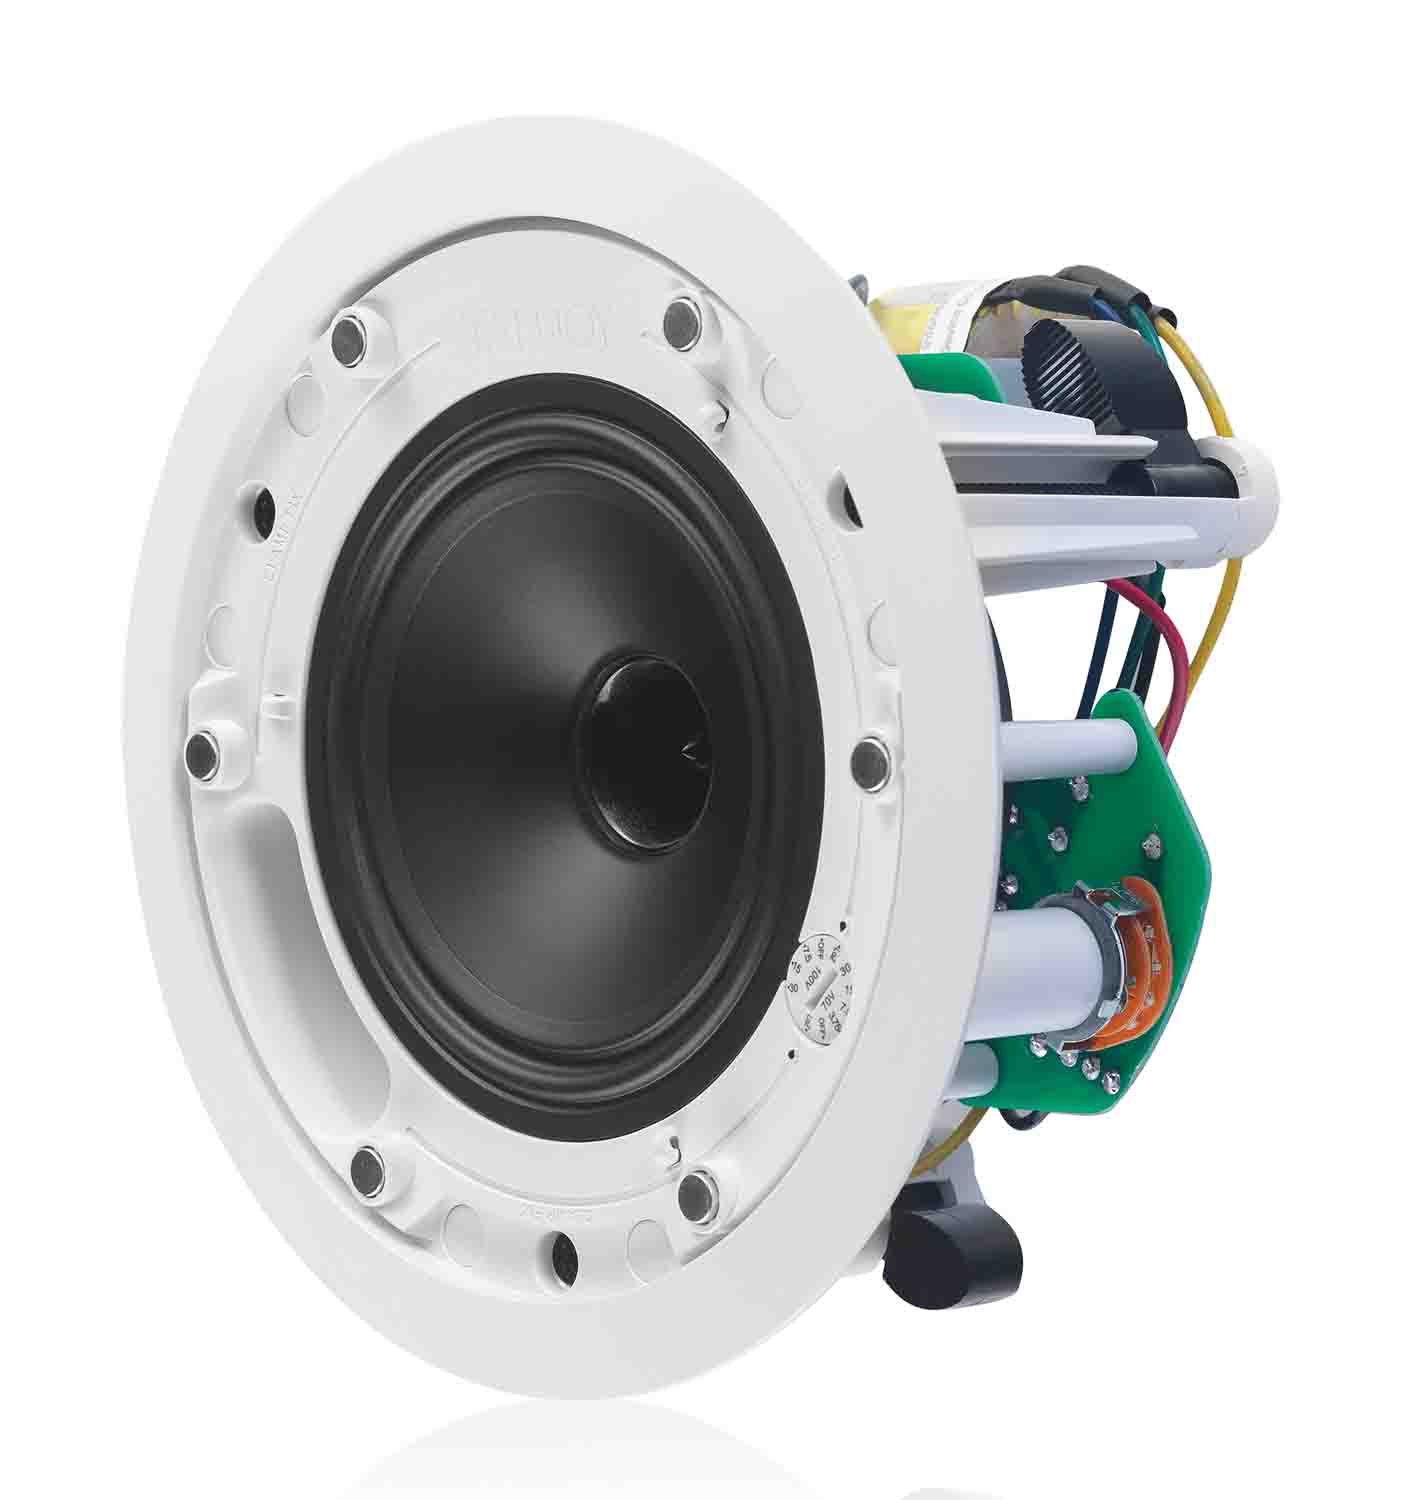 Tannoy CMS 503DC PI, 5-Inch Full Range Ceiling Loudspeaker with Dual Concentric Driver - Pre-Install - Hollywood DJ